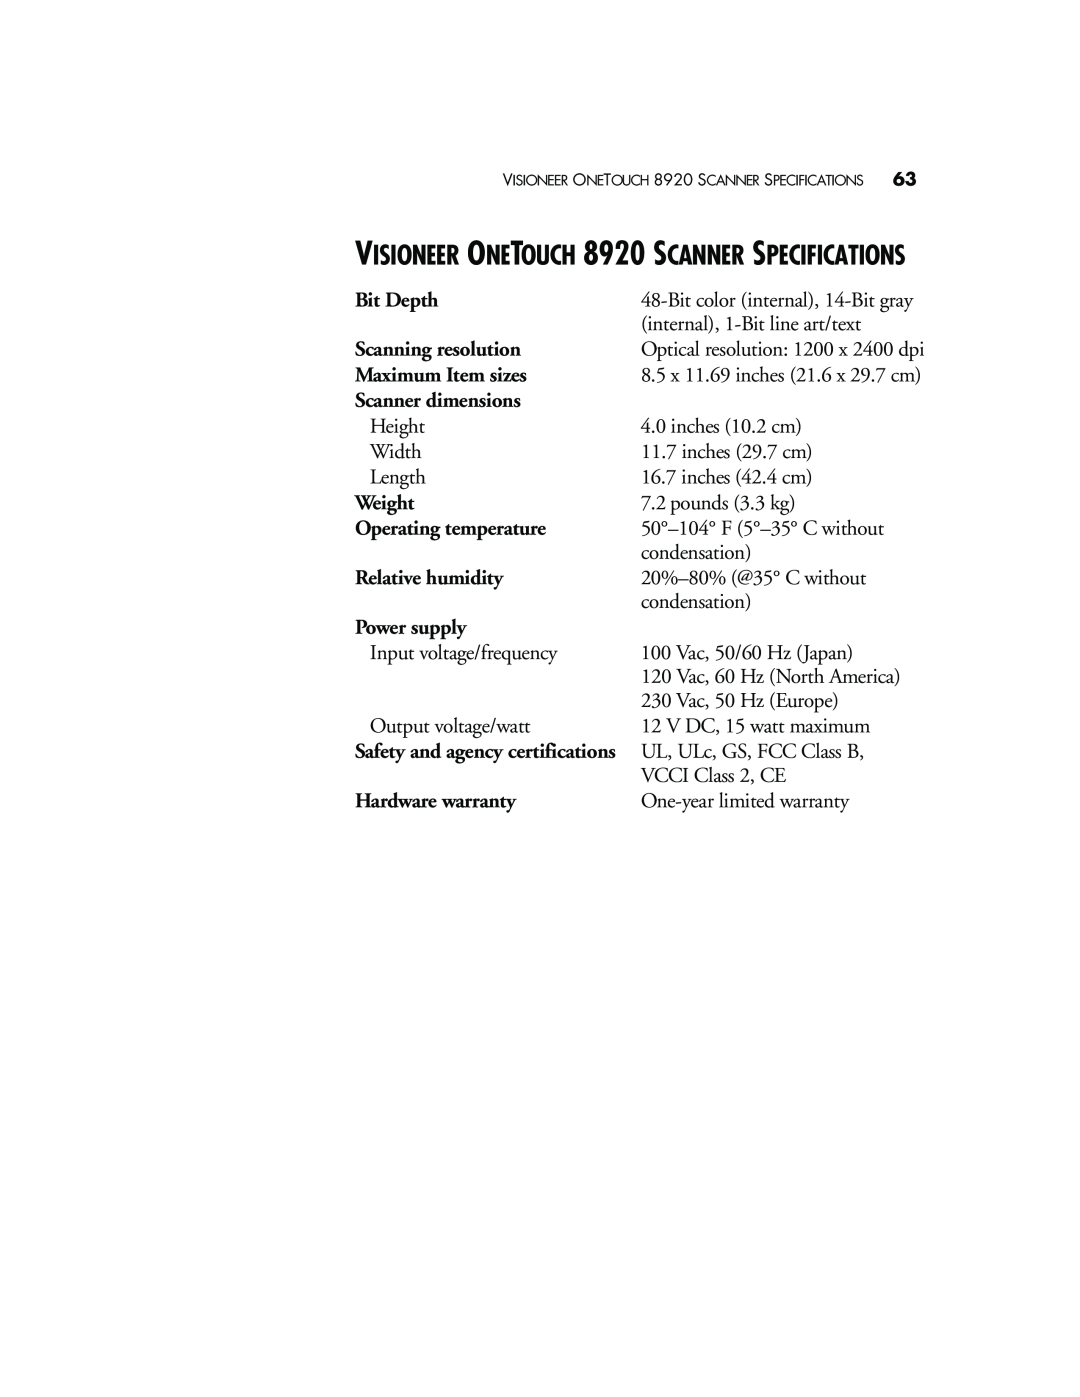 Visioneer manual VISIONEER ONETOUCH 8920 SCANNER SPECIFICATIONS 